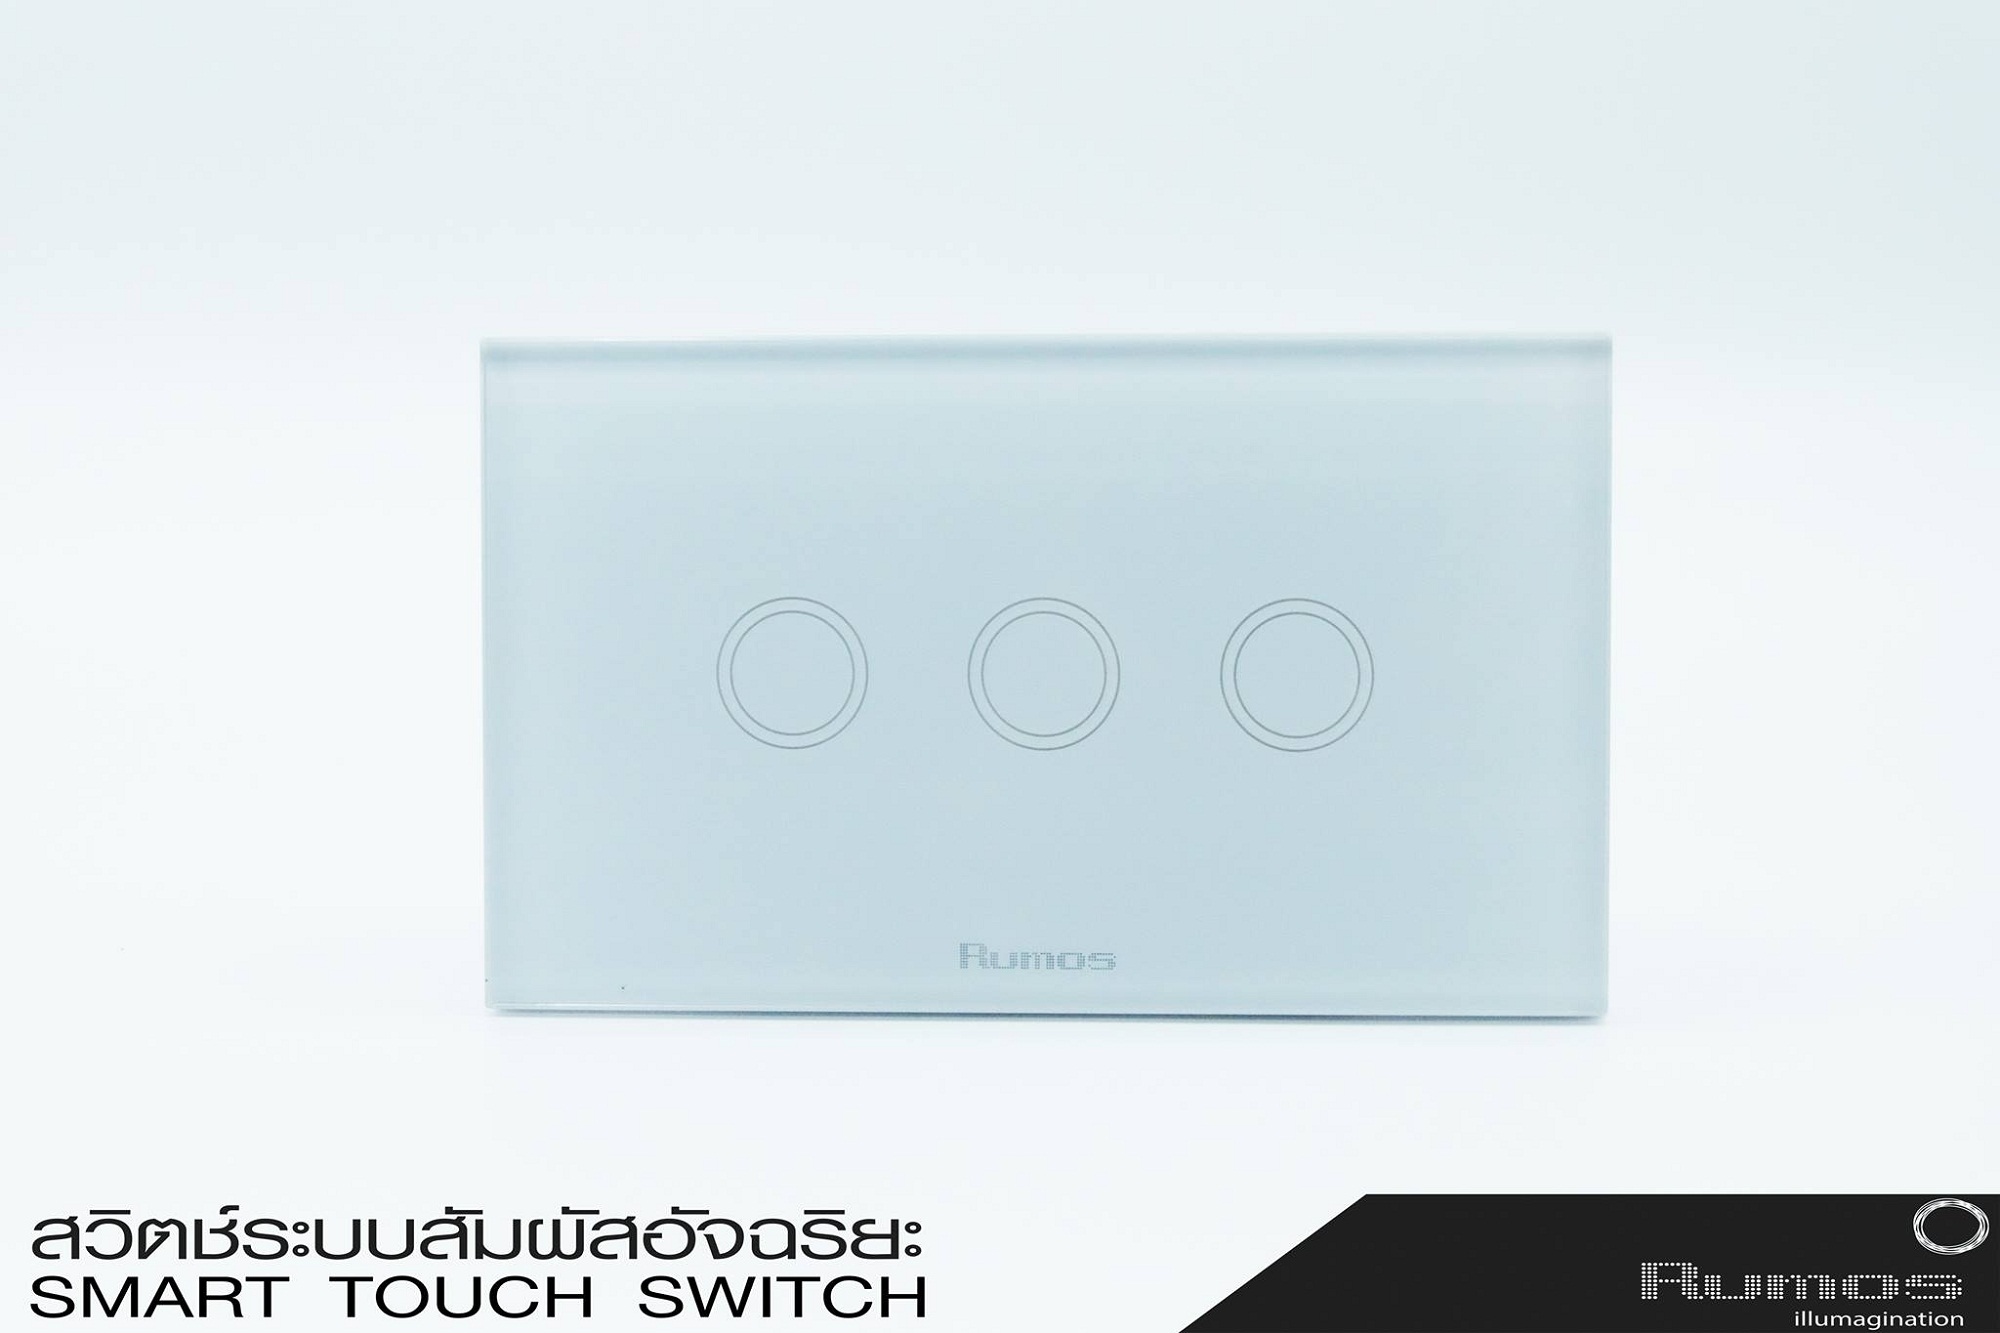 Rumos touch switch 3gangs 1 way white 